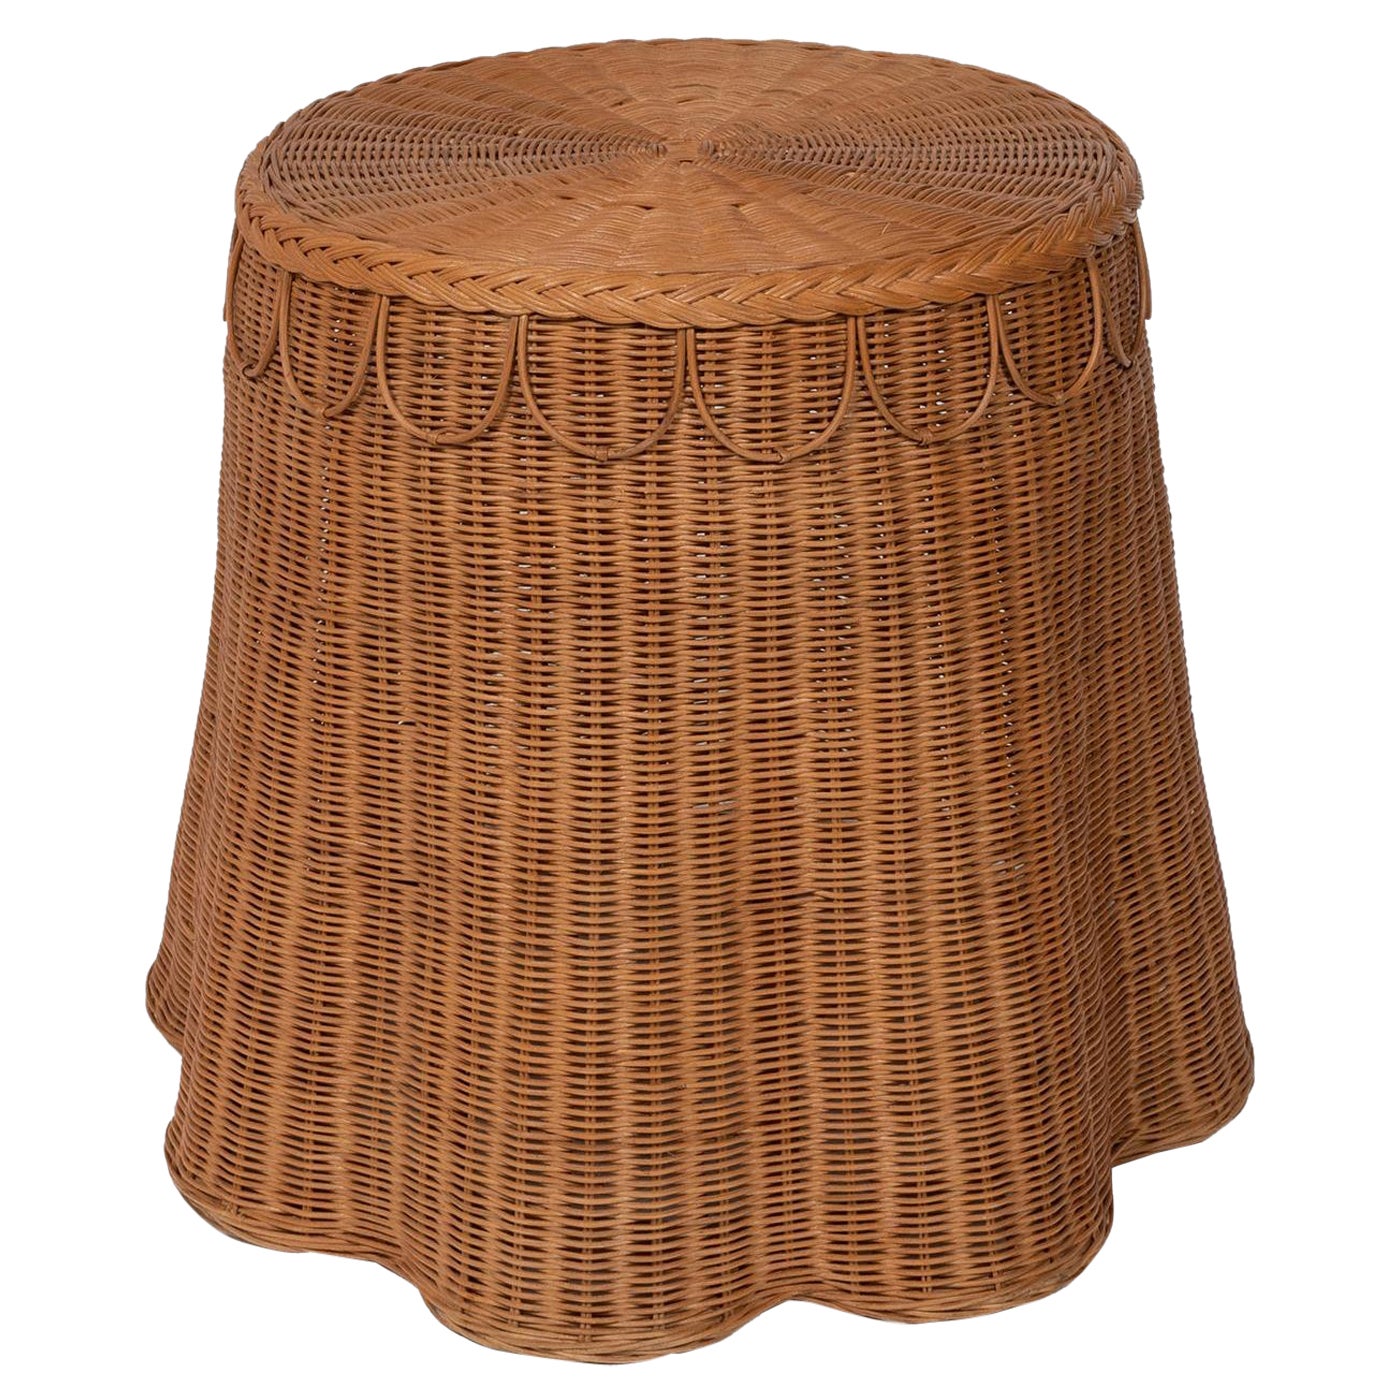 Adeline Side Table in Natural Honey Rattan, Modern furniture by Louise Roe For Sale